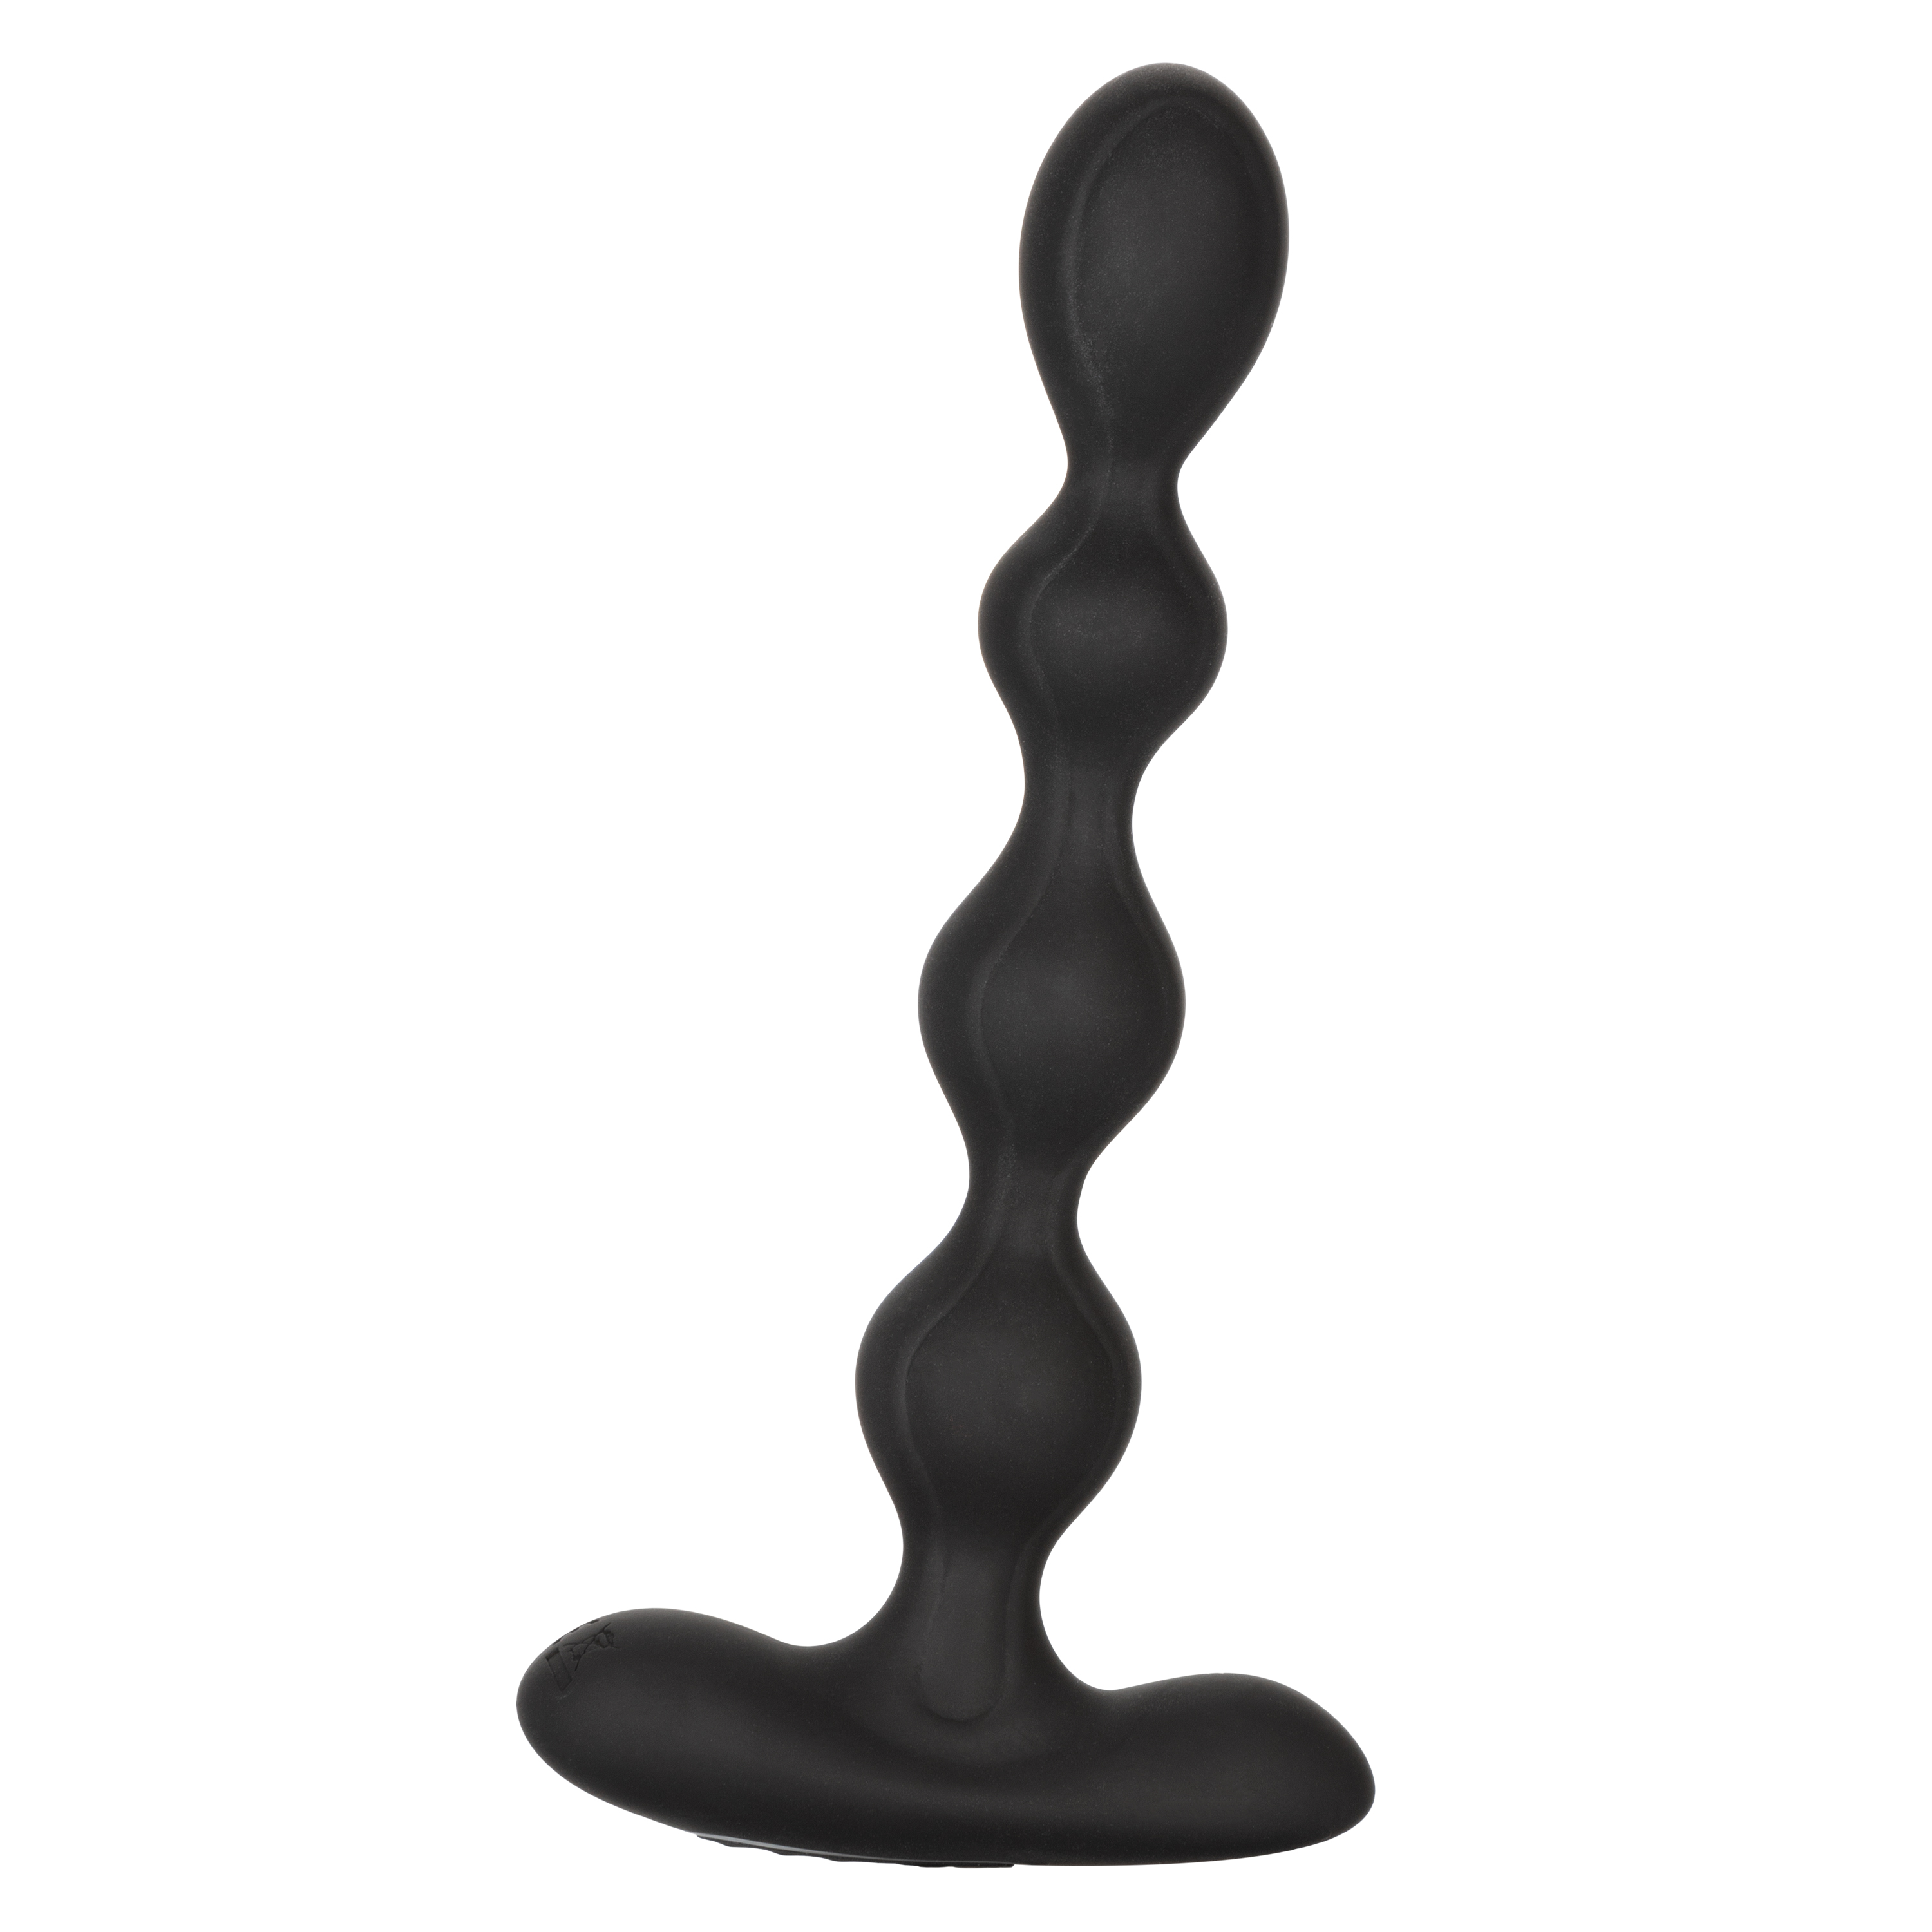 Eclipse+Slender+Beads+Silicone+Flexible+USB+Rechargeable+Anal+Beads+Probe+Waterproof+7+Inch